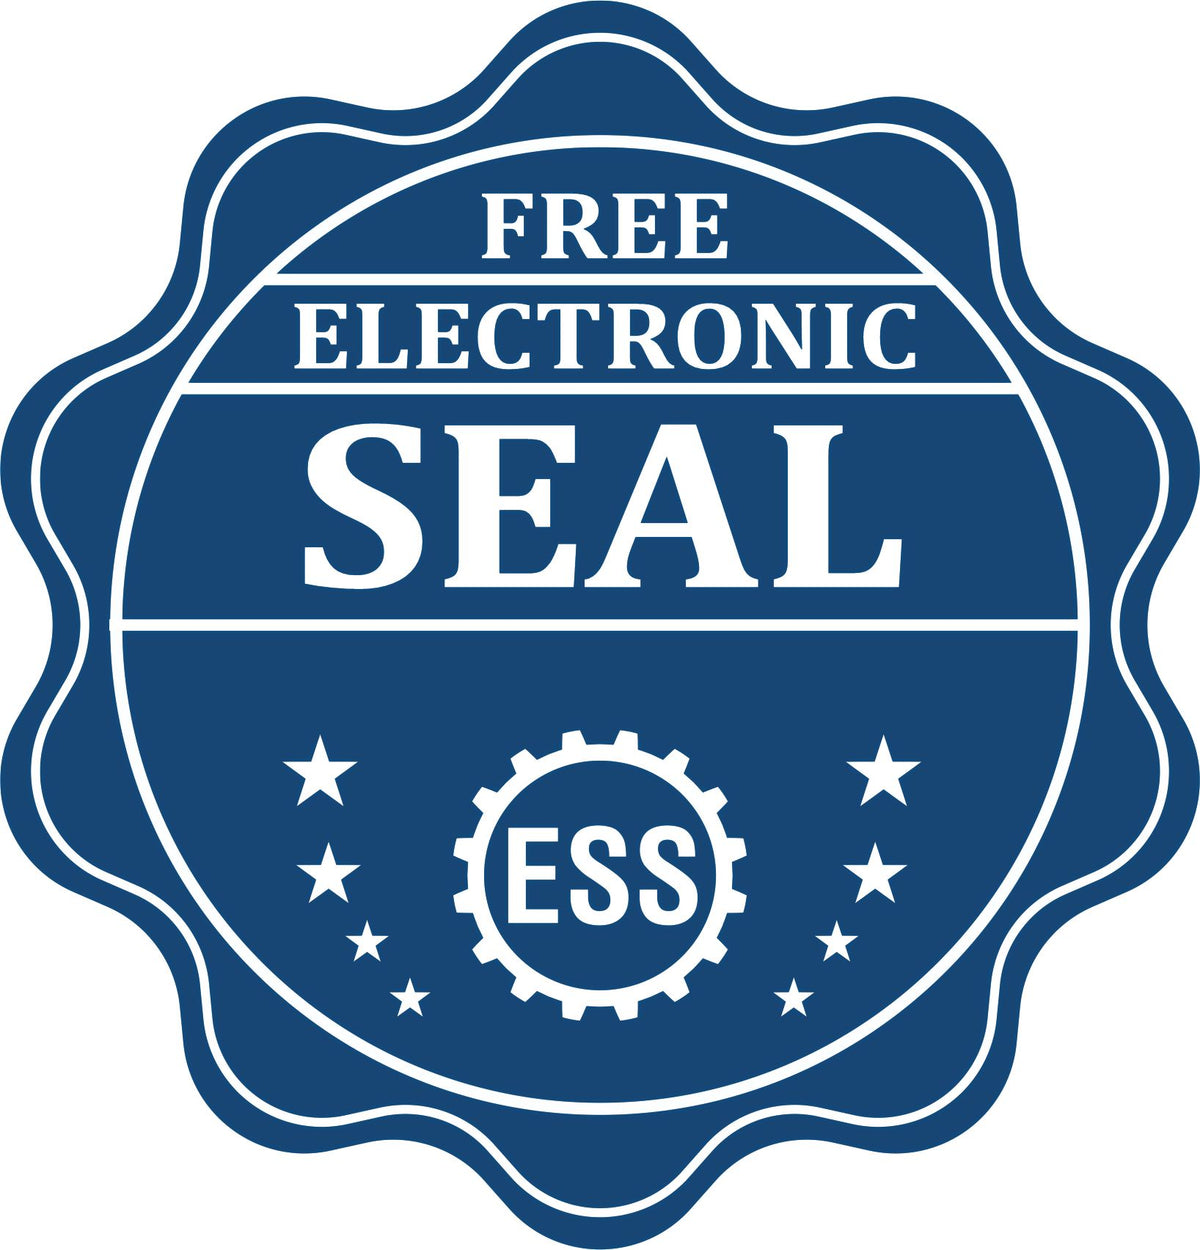 A badge showing a free electronic seal for the Heavy Duty Cast Iron Georgia Architect Embosser with stars and the ESS gear on the emblem.